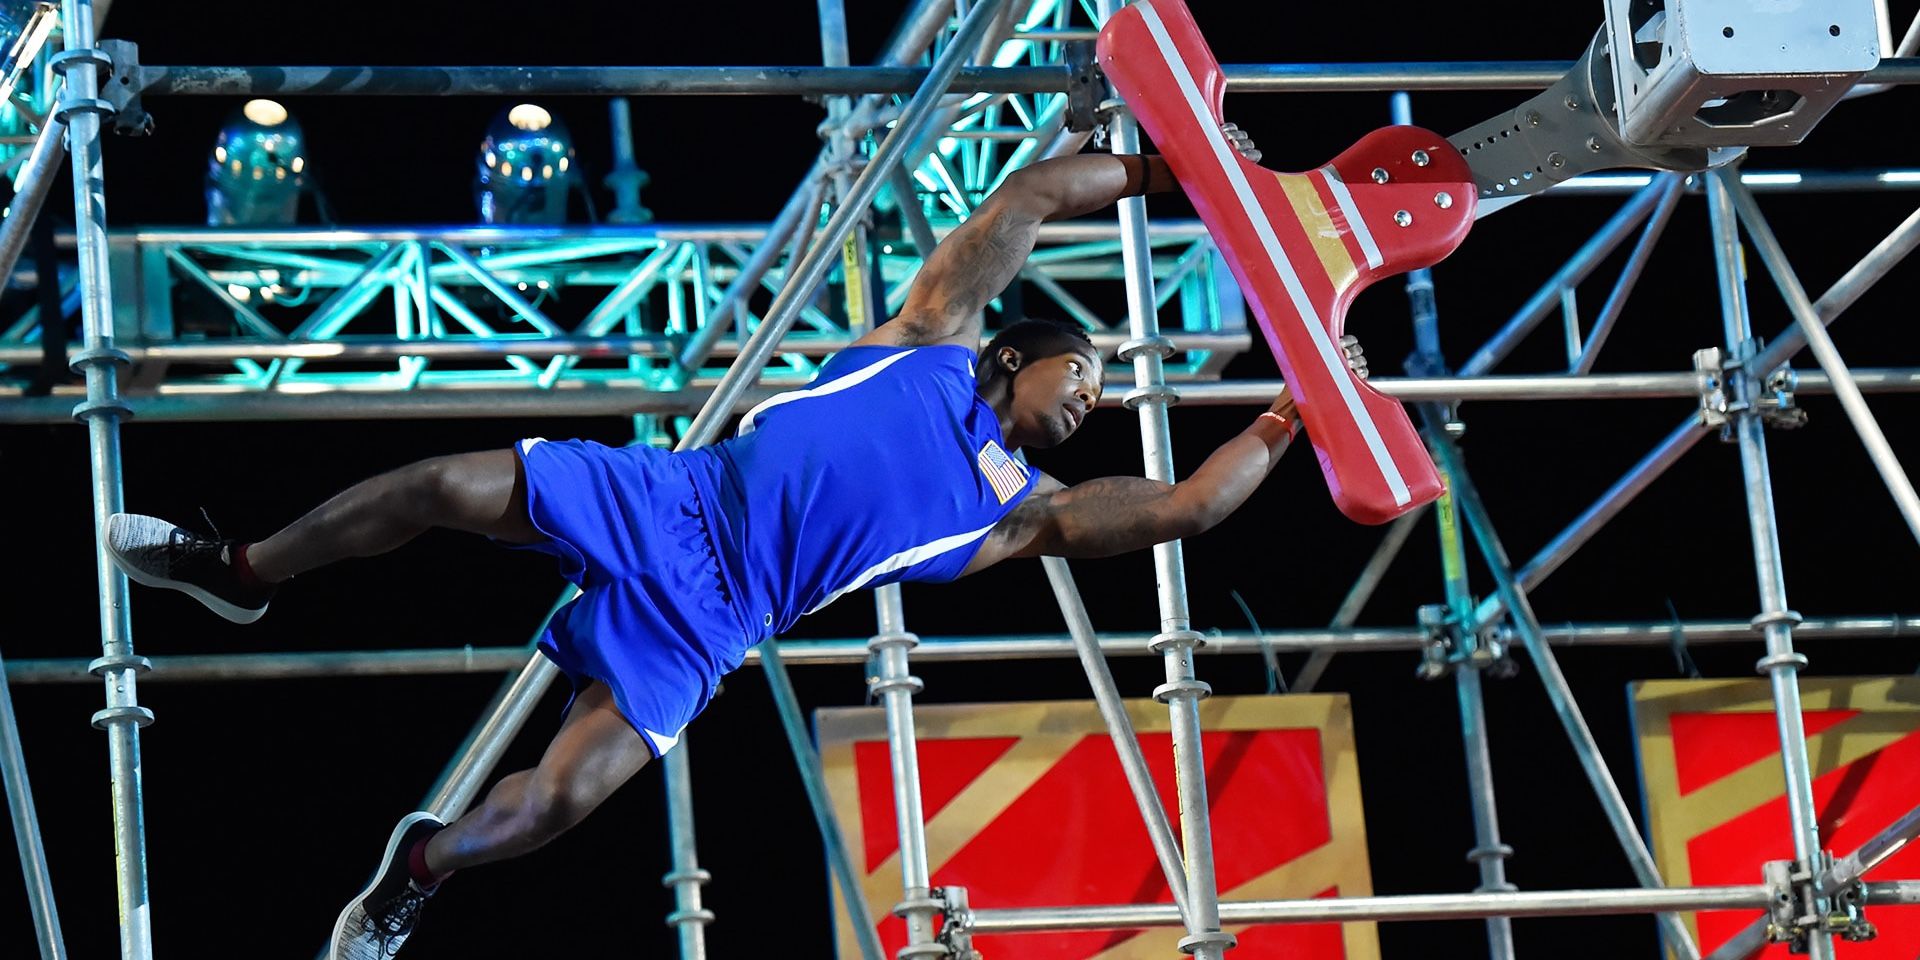 American Ninja Warrior How Season 13 Will Be Back to Normal (& How It Wont)